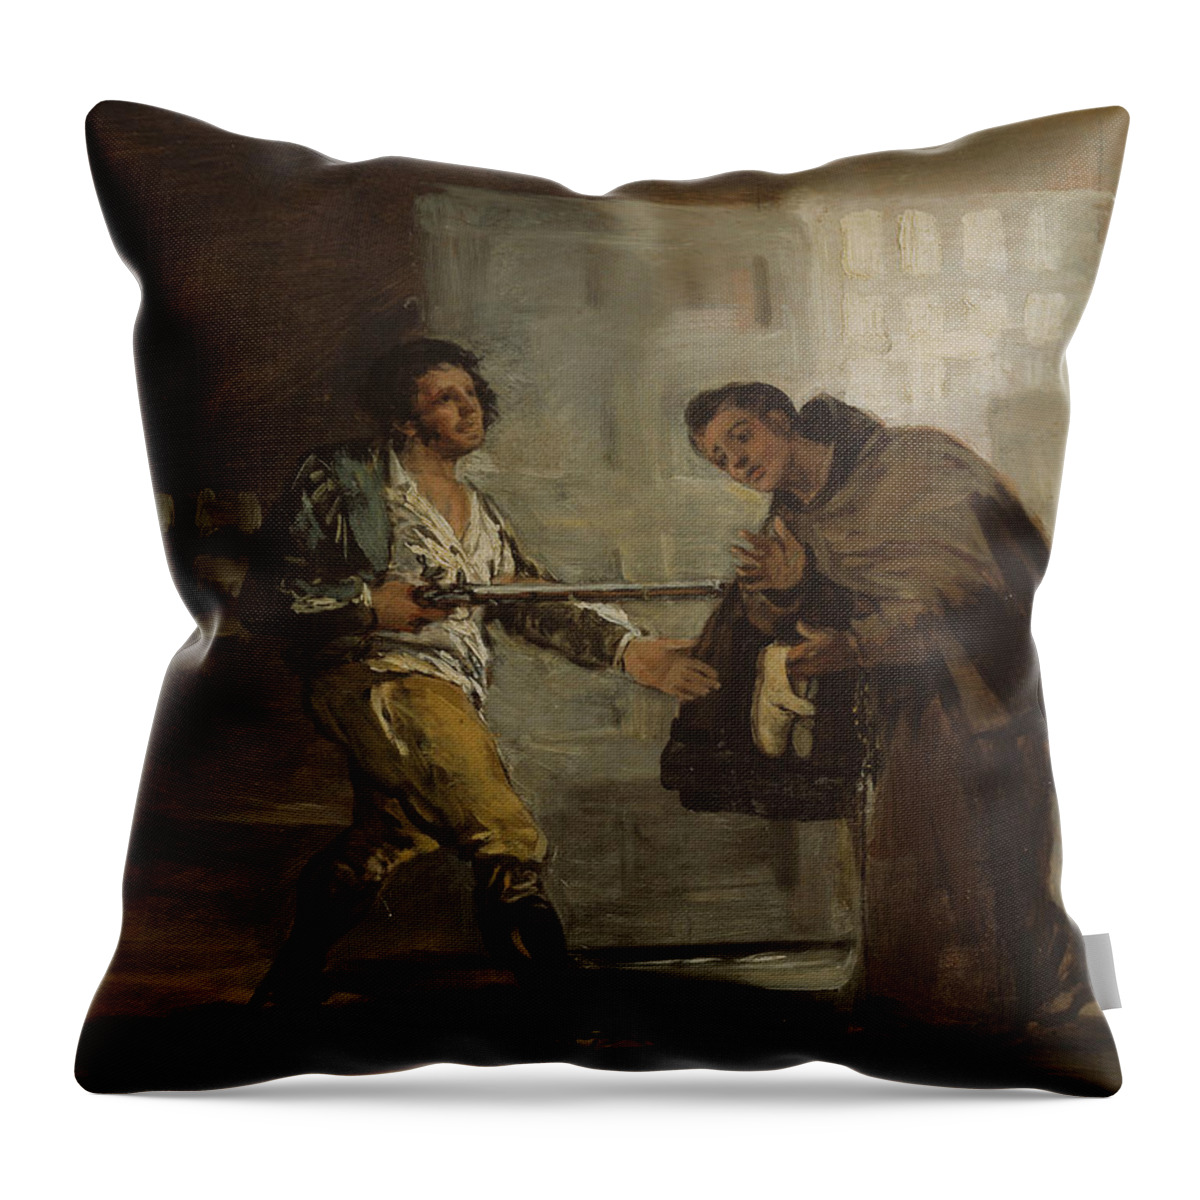 19th Century Art Throw Pillow featuring the painting Friar Pedro Offers Shoes to El Maragato and Prepares to Push Aside His Gun by Francisco Goya